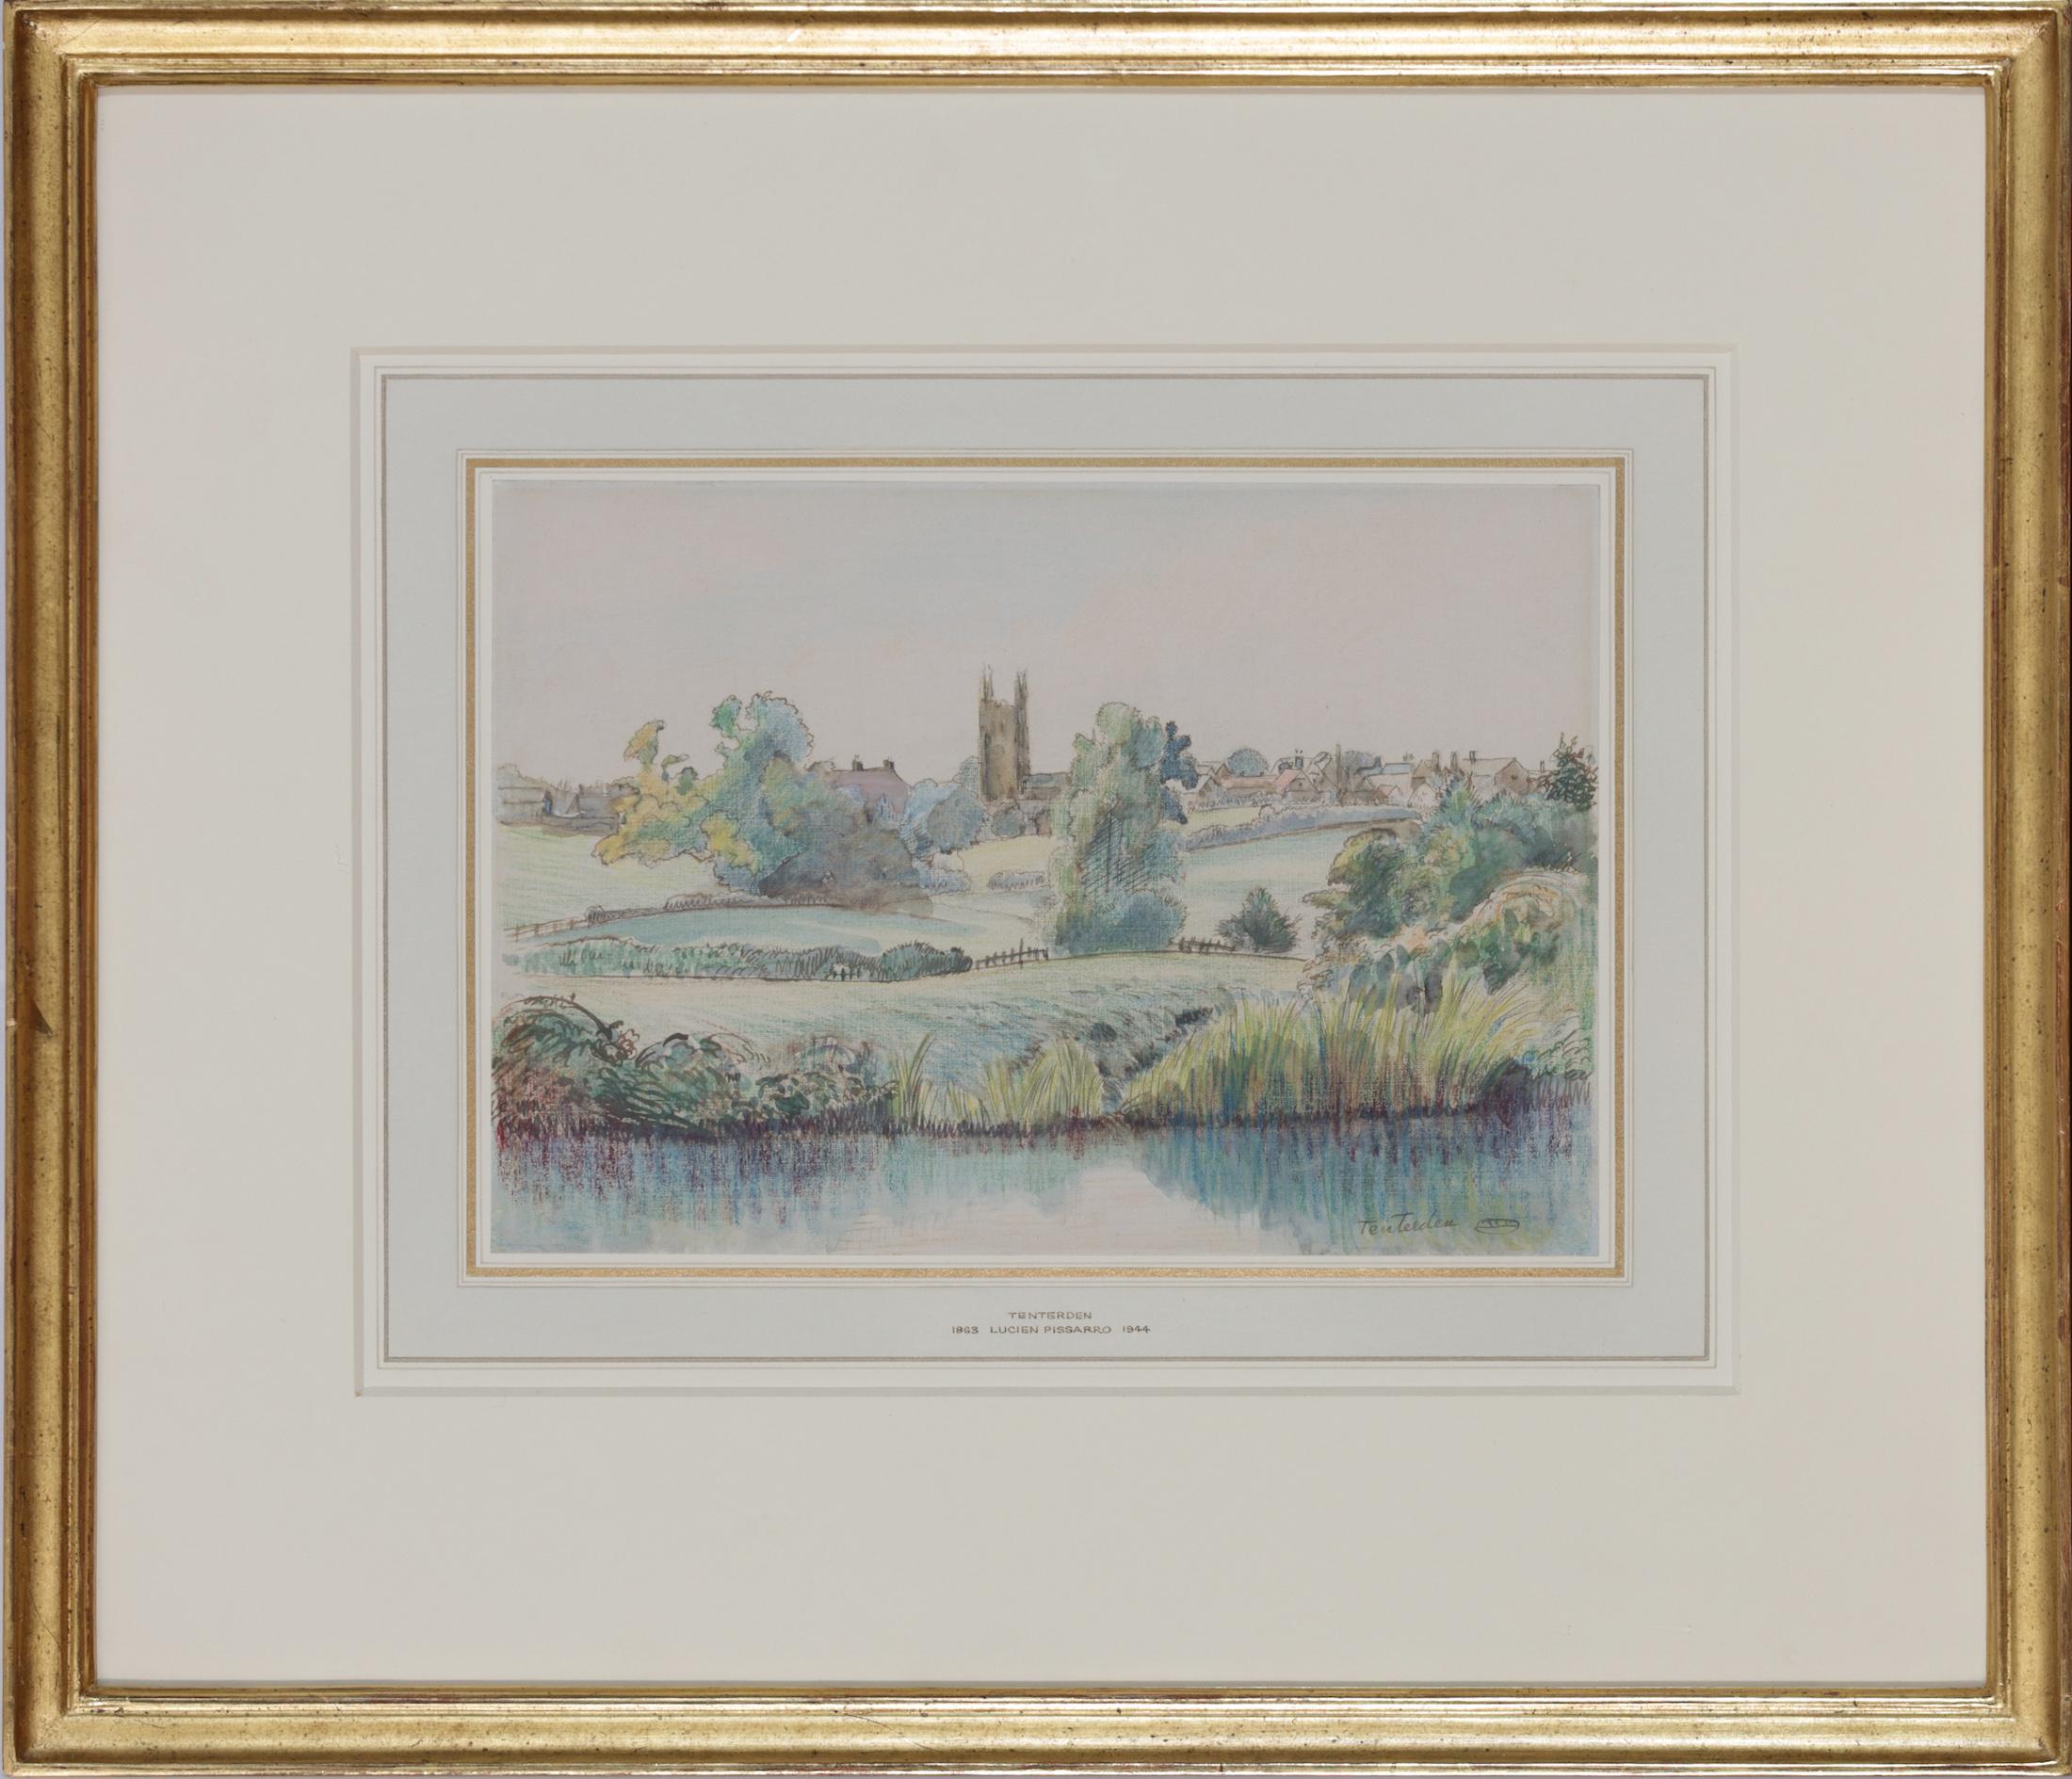 Tenterden by Lucien Pissarro (1863-1944)
Watercolour, ink, pen and coloured crayon
16.5 x 24 cm (6 ¹/₂ x 9 ¹/₂ inches)
Signed with monogram and titled lower right

Provenance: The Redfern Gallery, London
B.C. Adkin, acquired from the above in